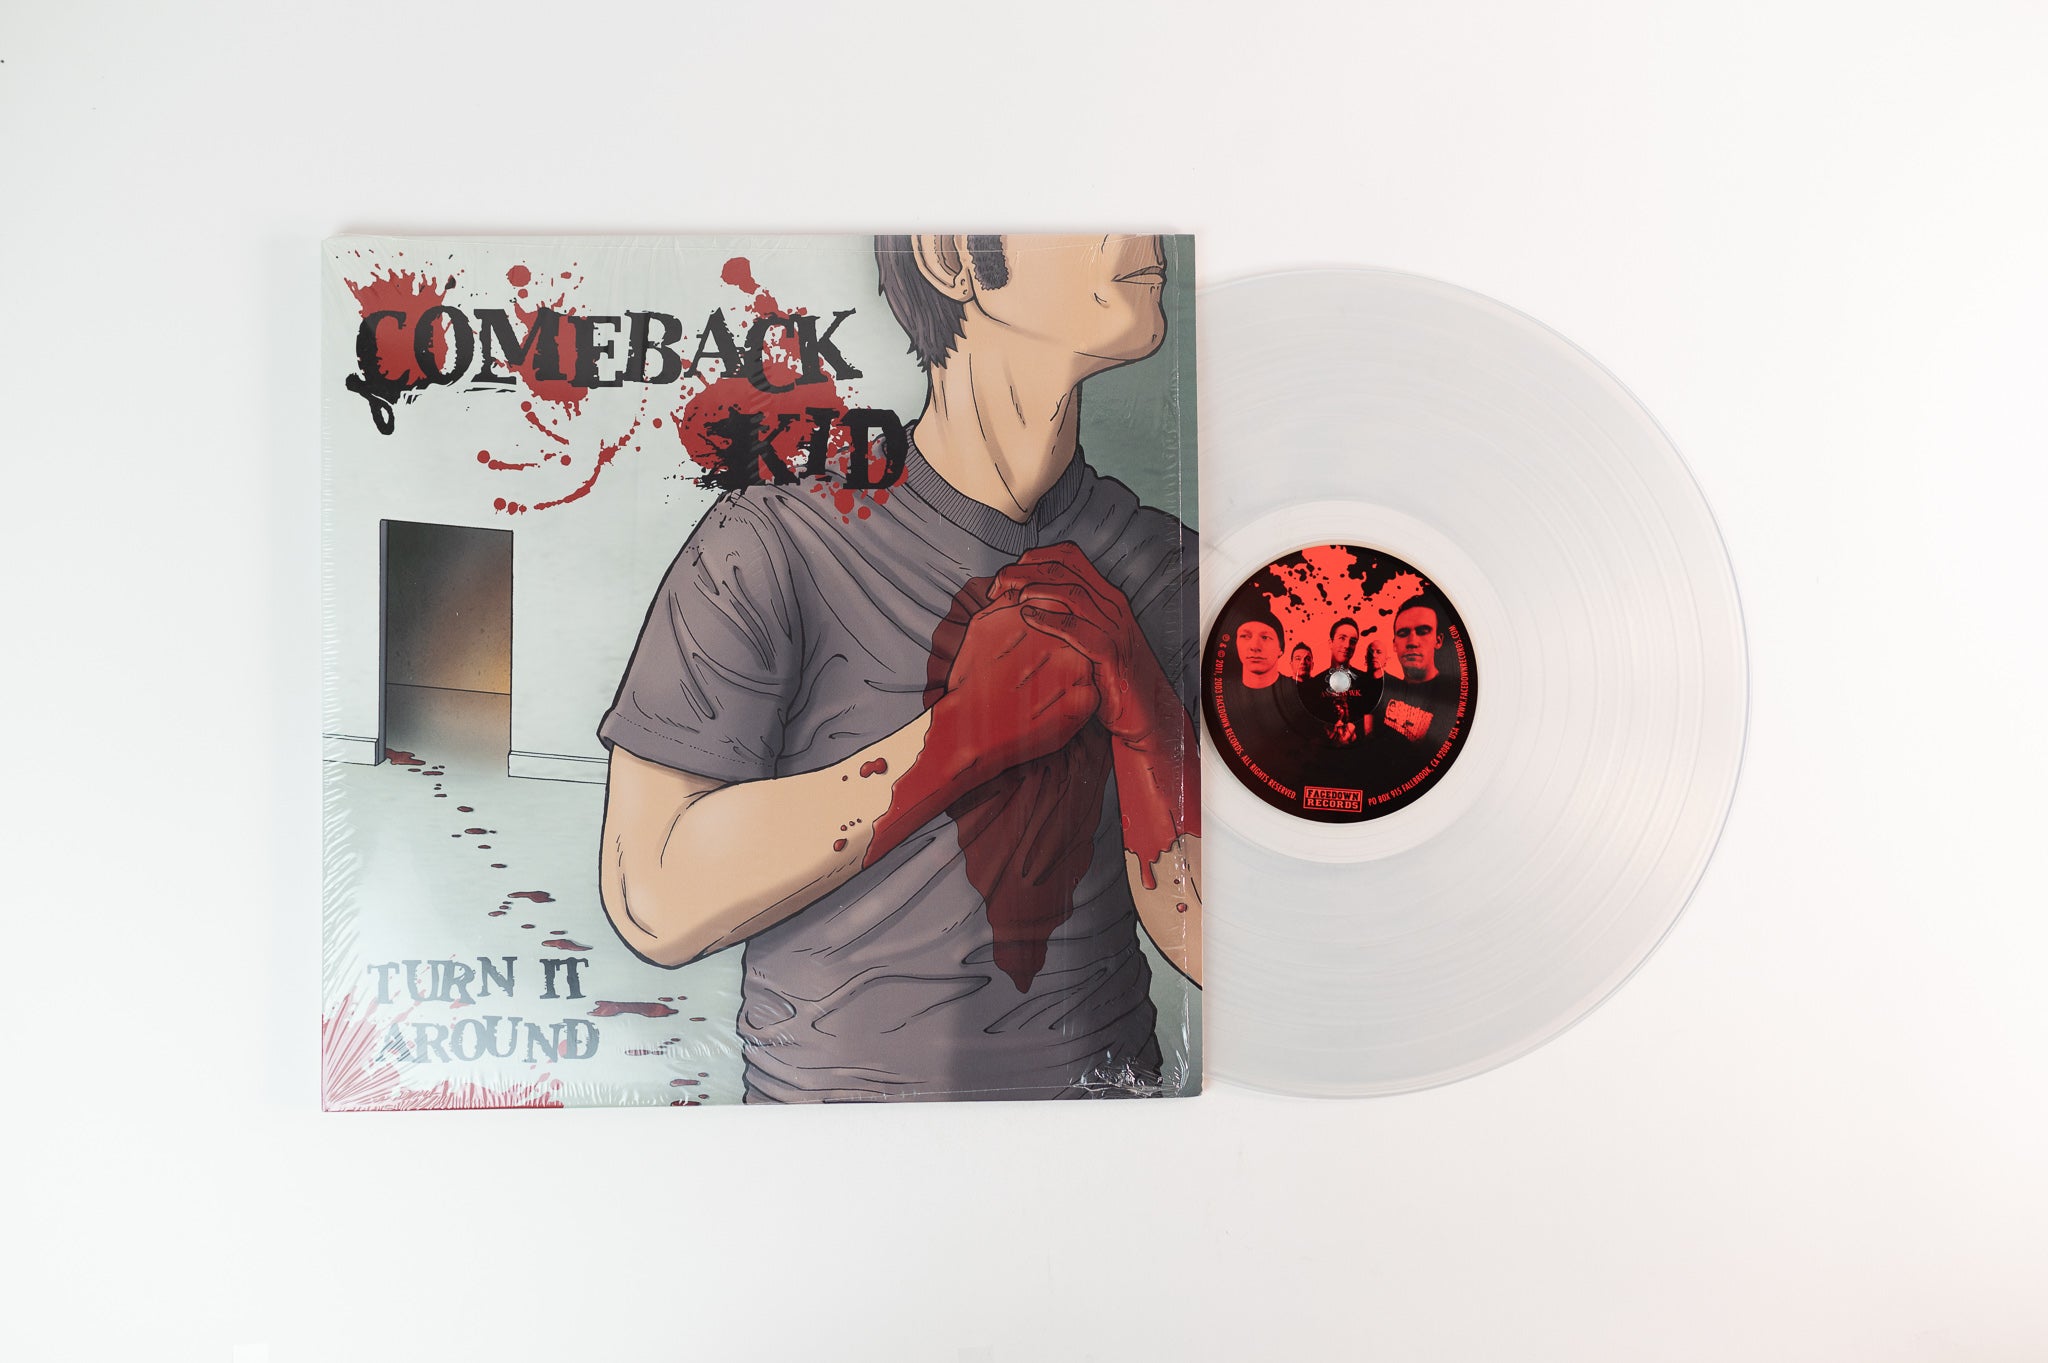 Comeback Kid - Turn It Around on Facedown Records - Clear Vinyl